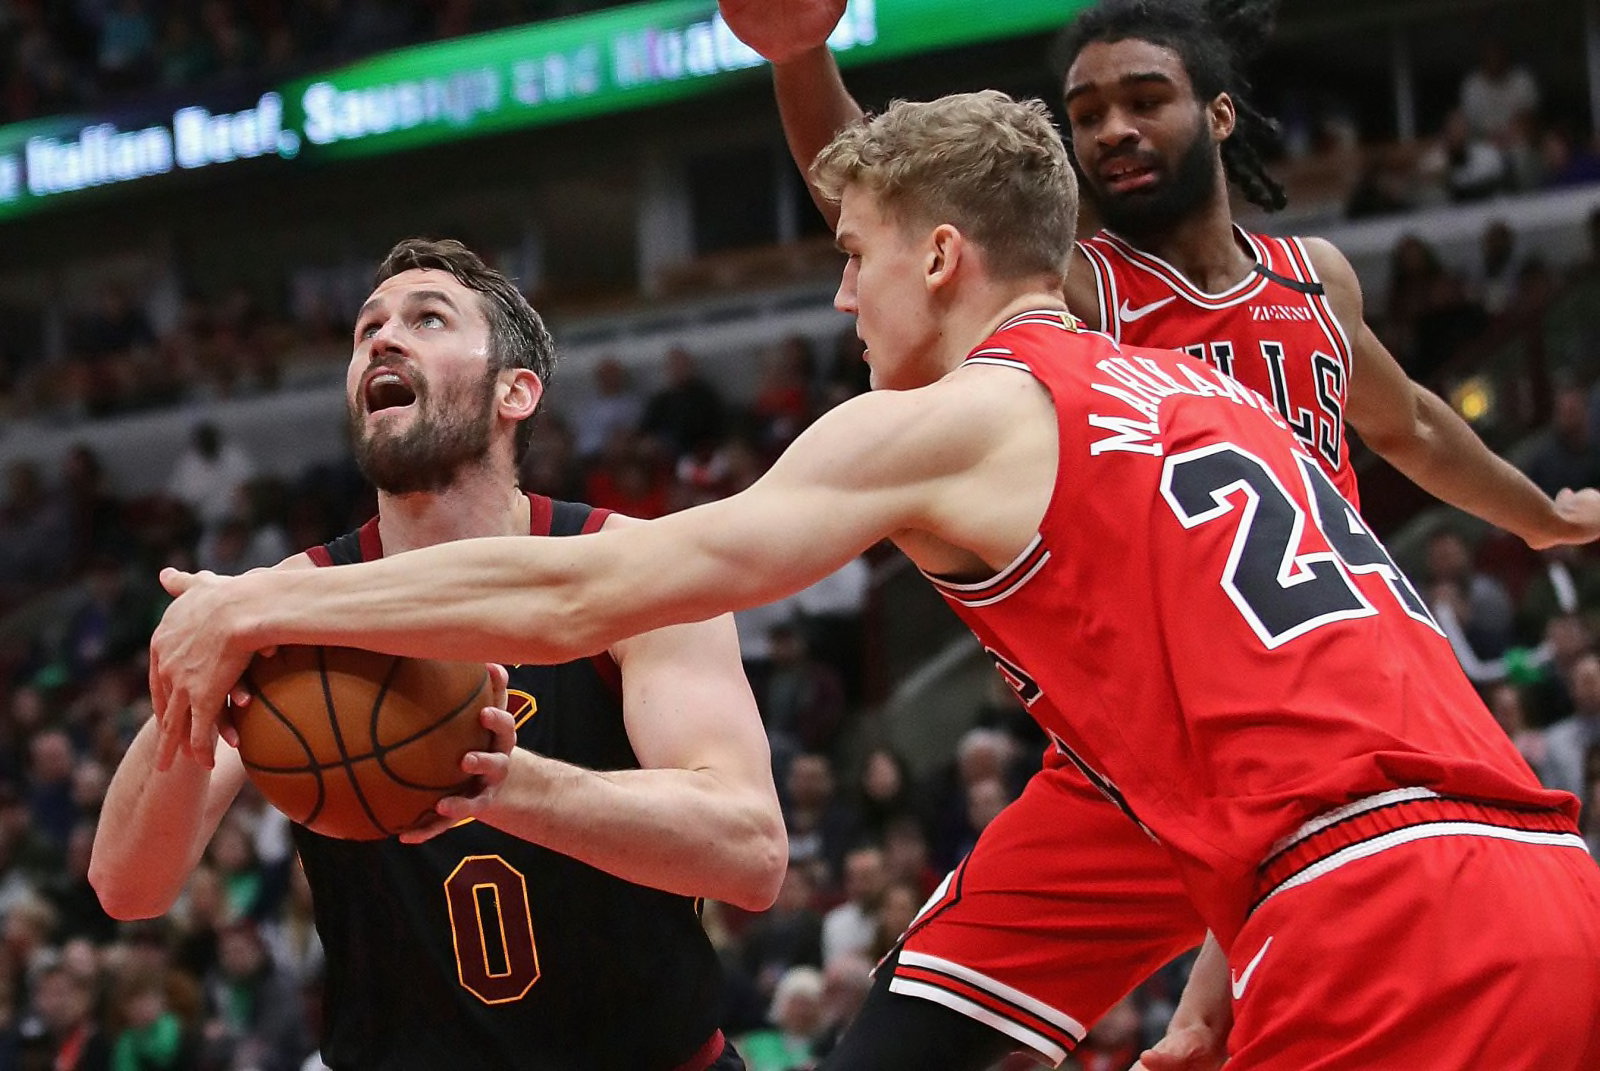 Chicago Bulls on X: Get well soon, Lauri. In his second NBA season, Lauri  Markkanen played in 52 games, averaging career highs in points (18.7),  rebounds (9.0) & minutes per game (32.3).